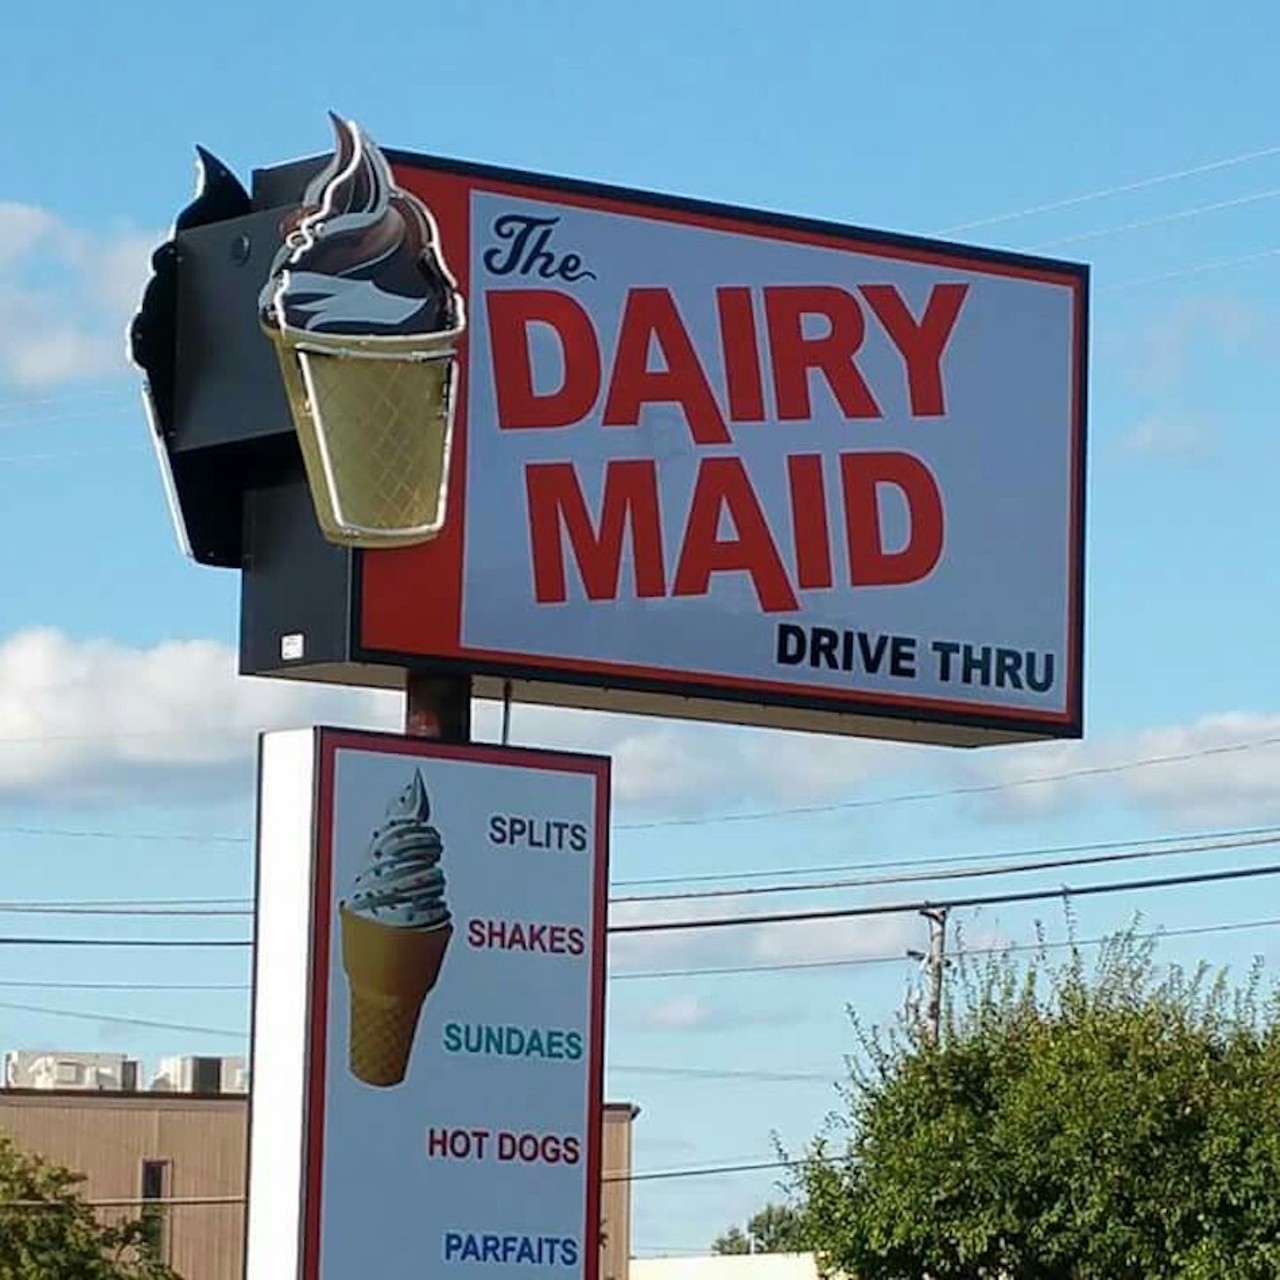 The Dairy Maid
31817 Utica Rd., Fraser; 586-294-1660
This family-owned shop is known for its drive-thru service, which can attracts a long line — but fans insist it's worth the wait.